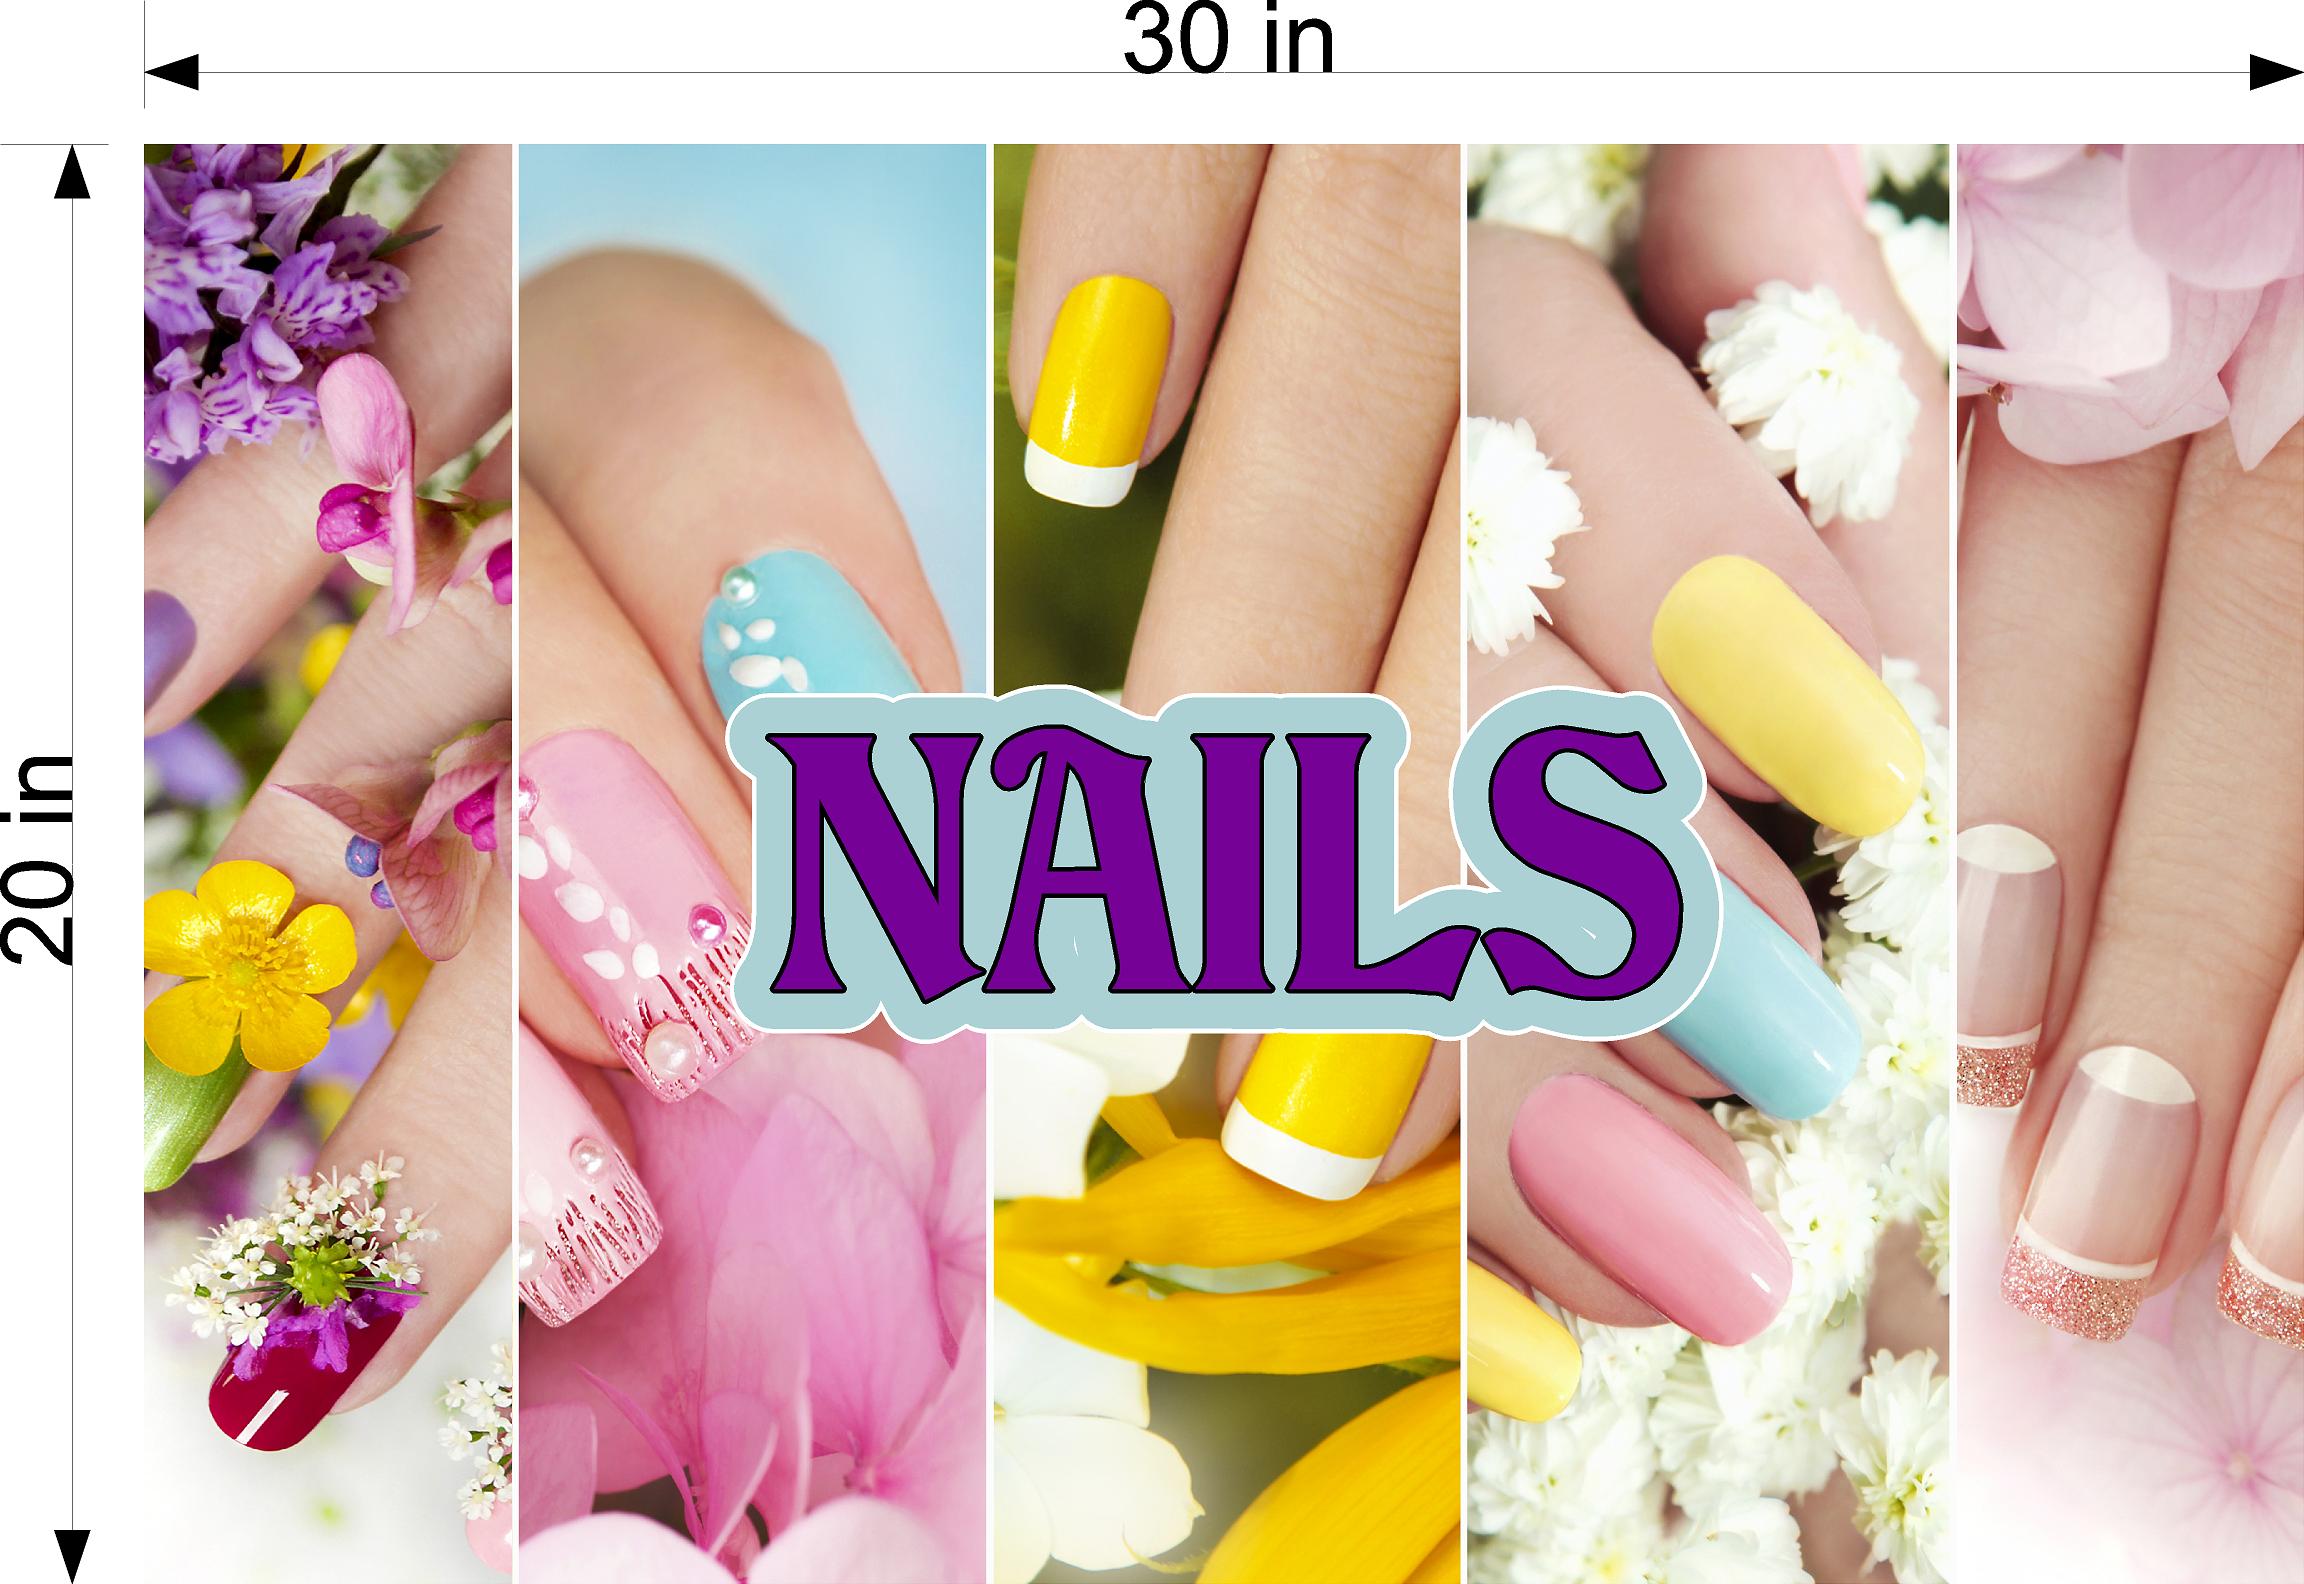 Nails 08 Wallpaper Poster Decal with Adhesive Backing Wall Sticker Decor Indoors Interior Sign Horizontal